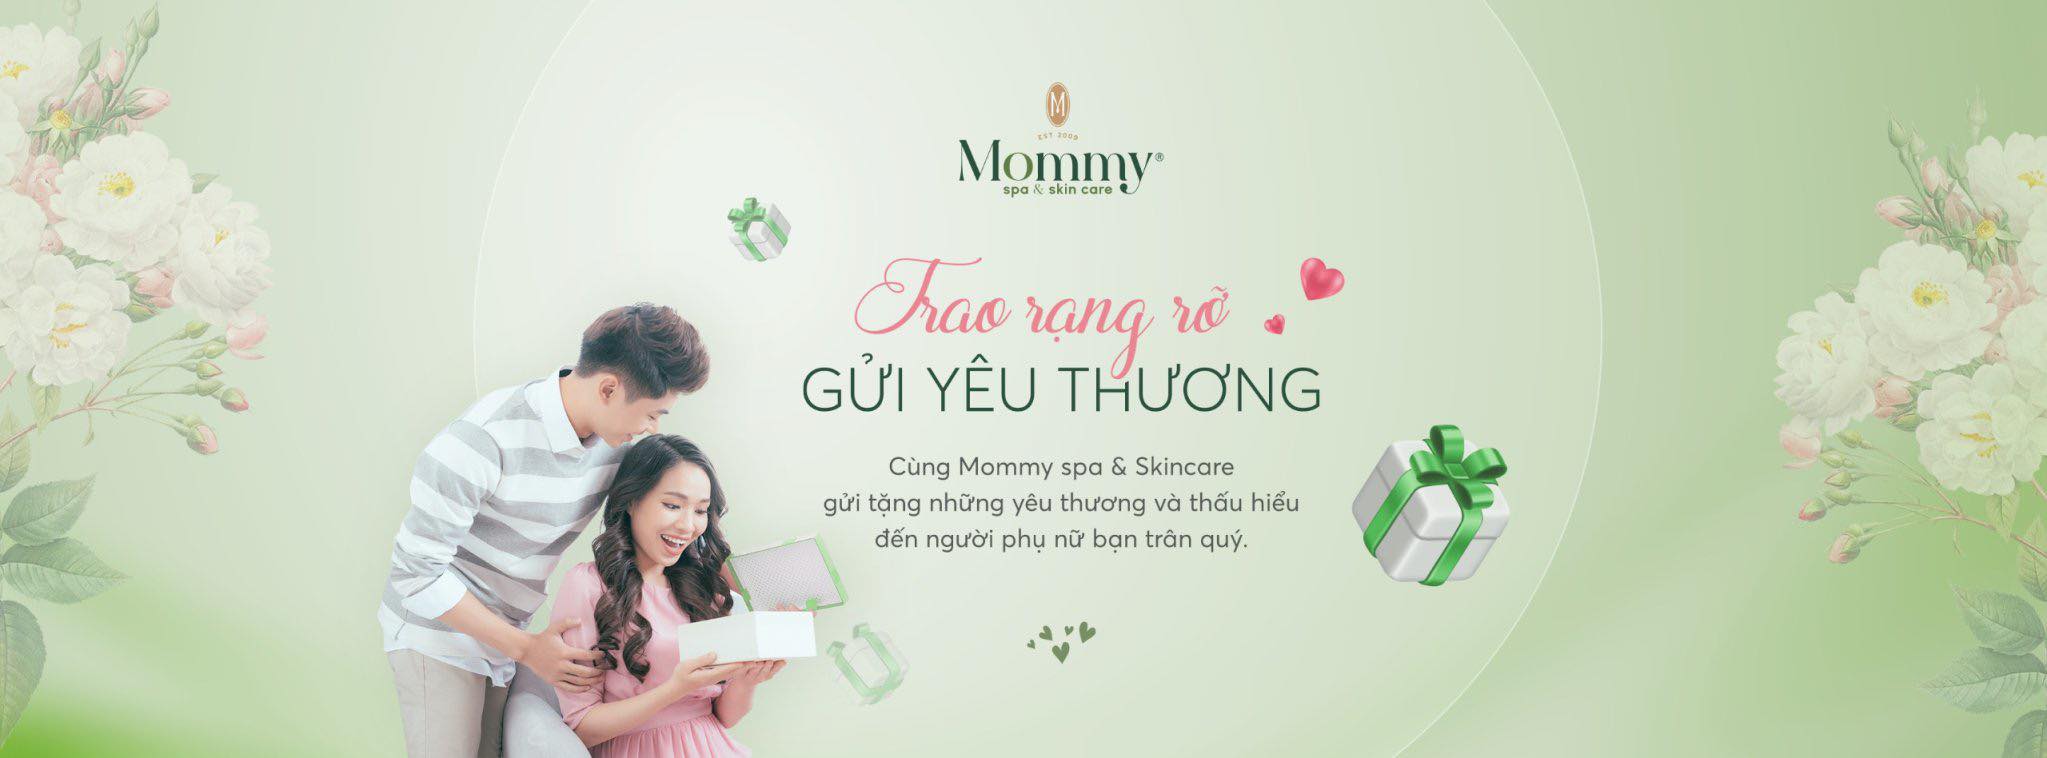 Mommy Spa & Skincare